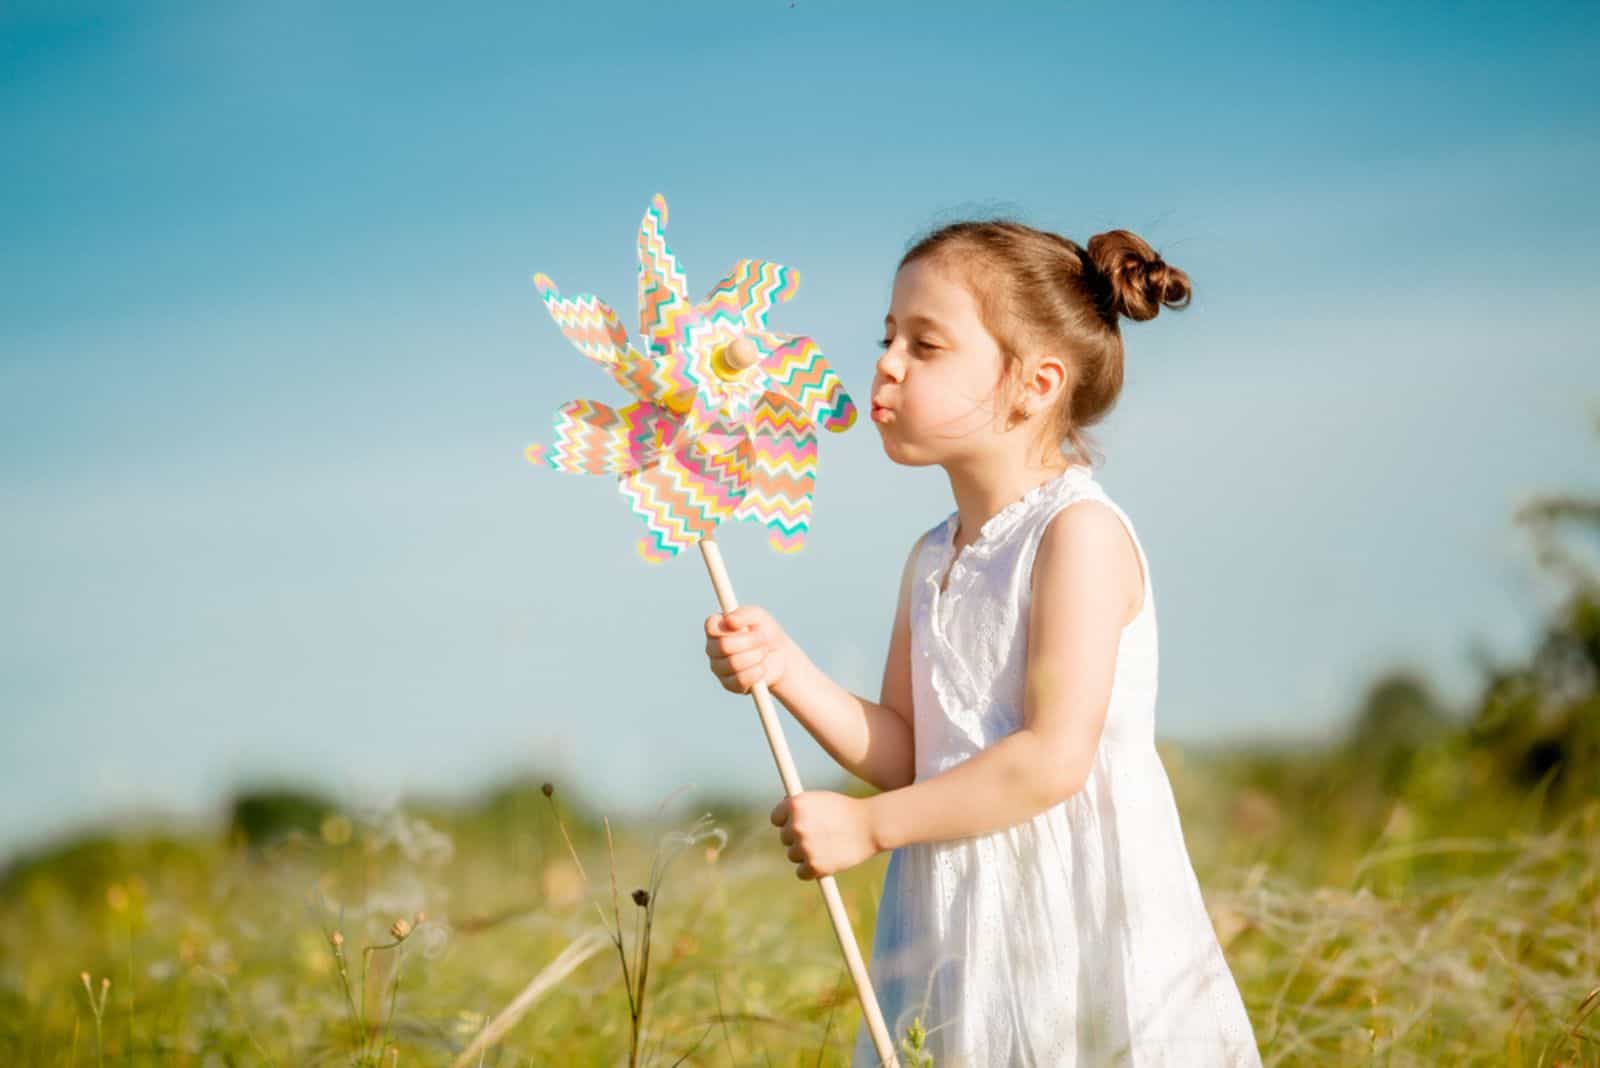 Cute little girl smiling summer in the field holding a windmill
